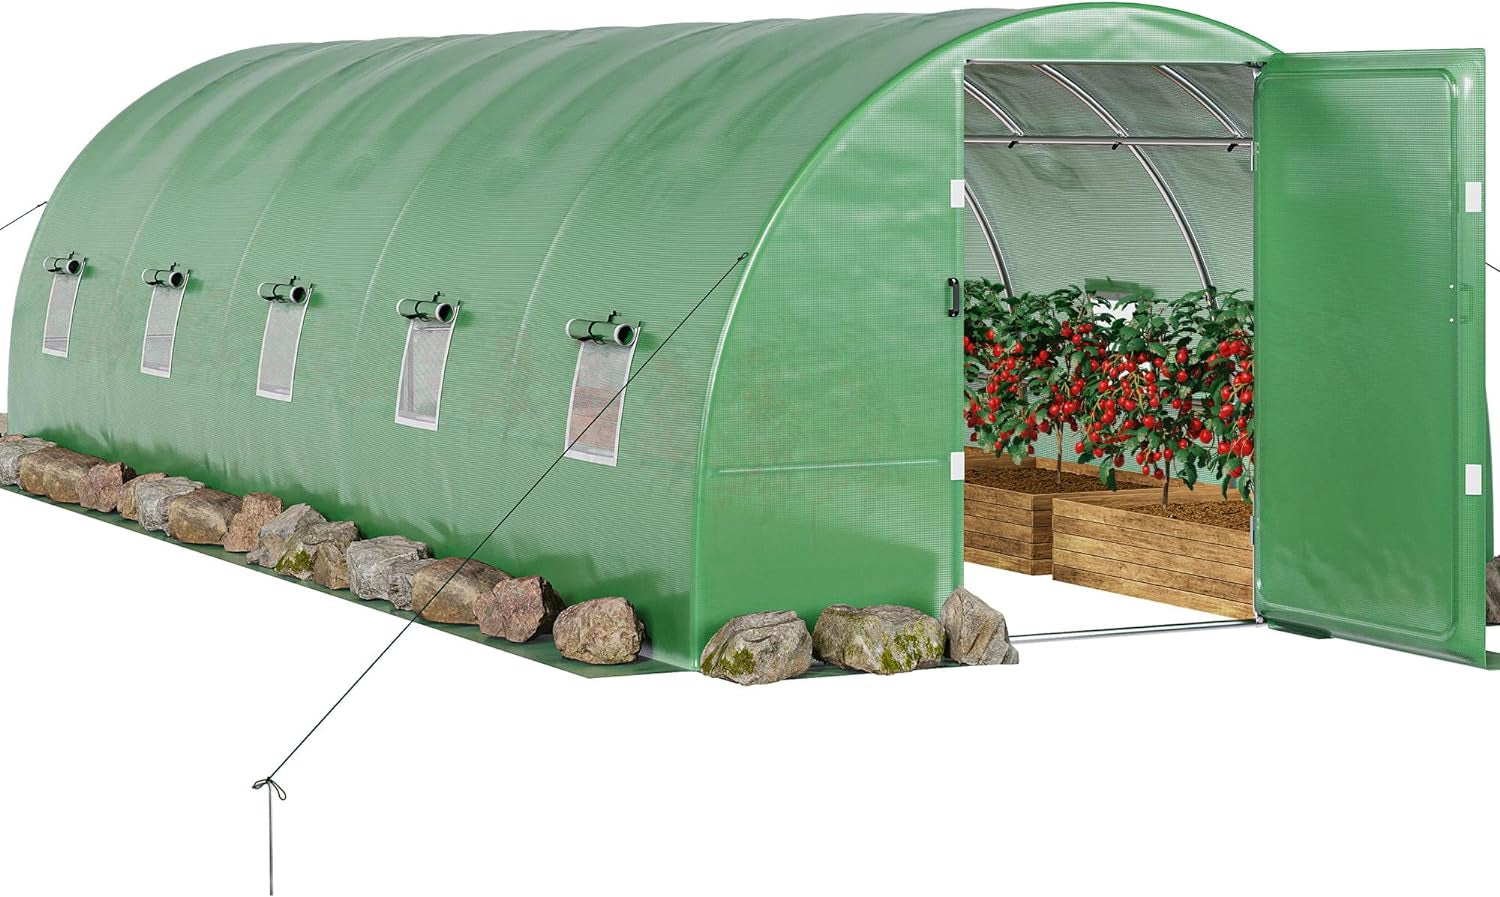 26X10X7Ft Greenhouse Extra Large Heavy Duty Large 2 Swing Doors Walk-In Greenhouses Tunnel Green Houses Outdoor 10 Windows Gardening Upgraded Galvanized Steel Garden, Green - Design By Technique